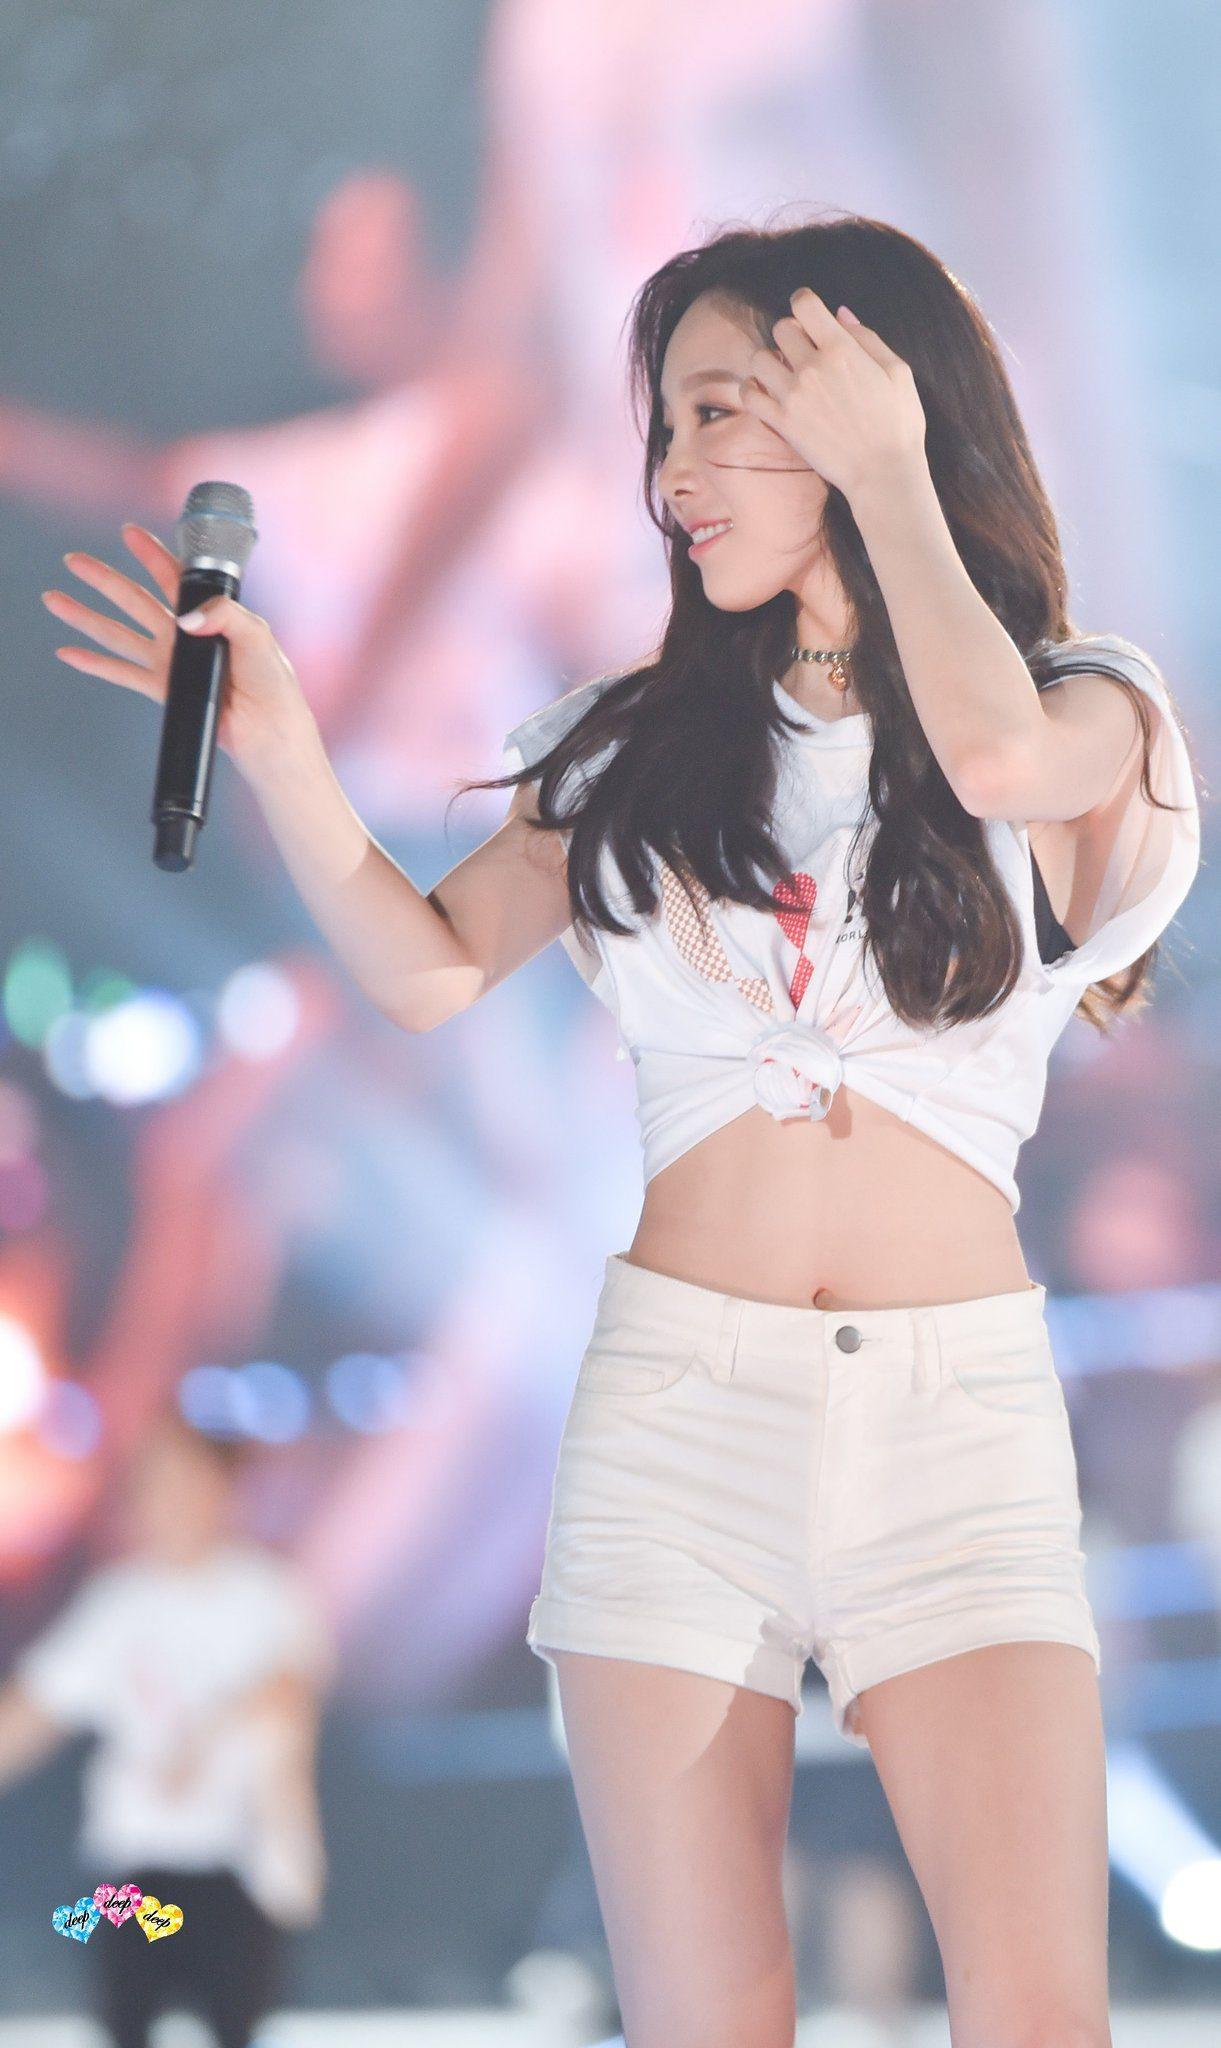 10+ Sexiest Outfits Of Taeyeon Ever - Koreaboo